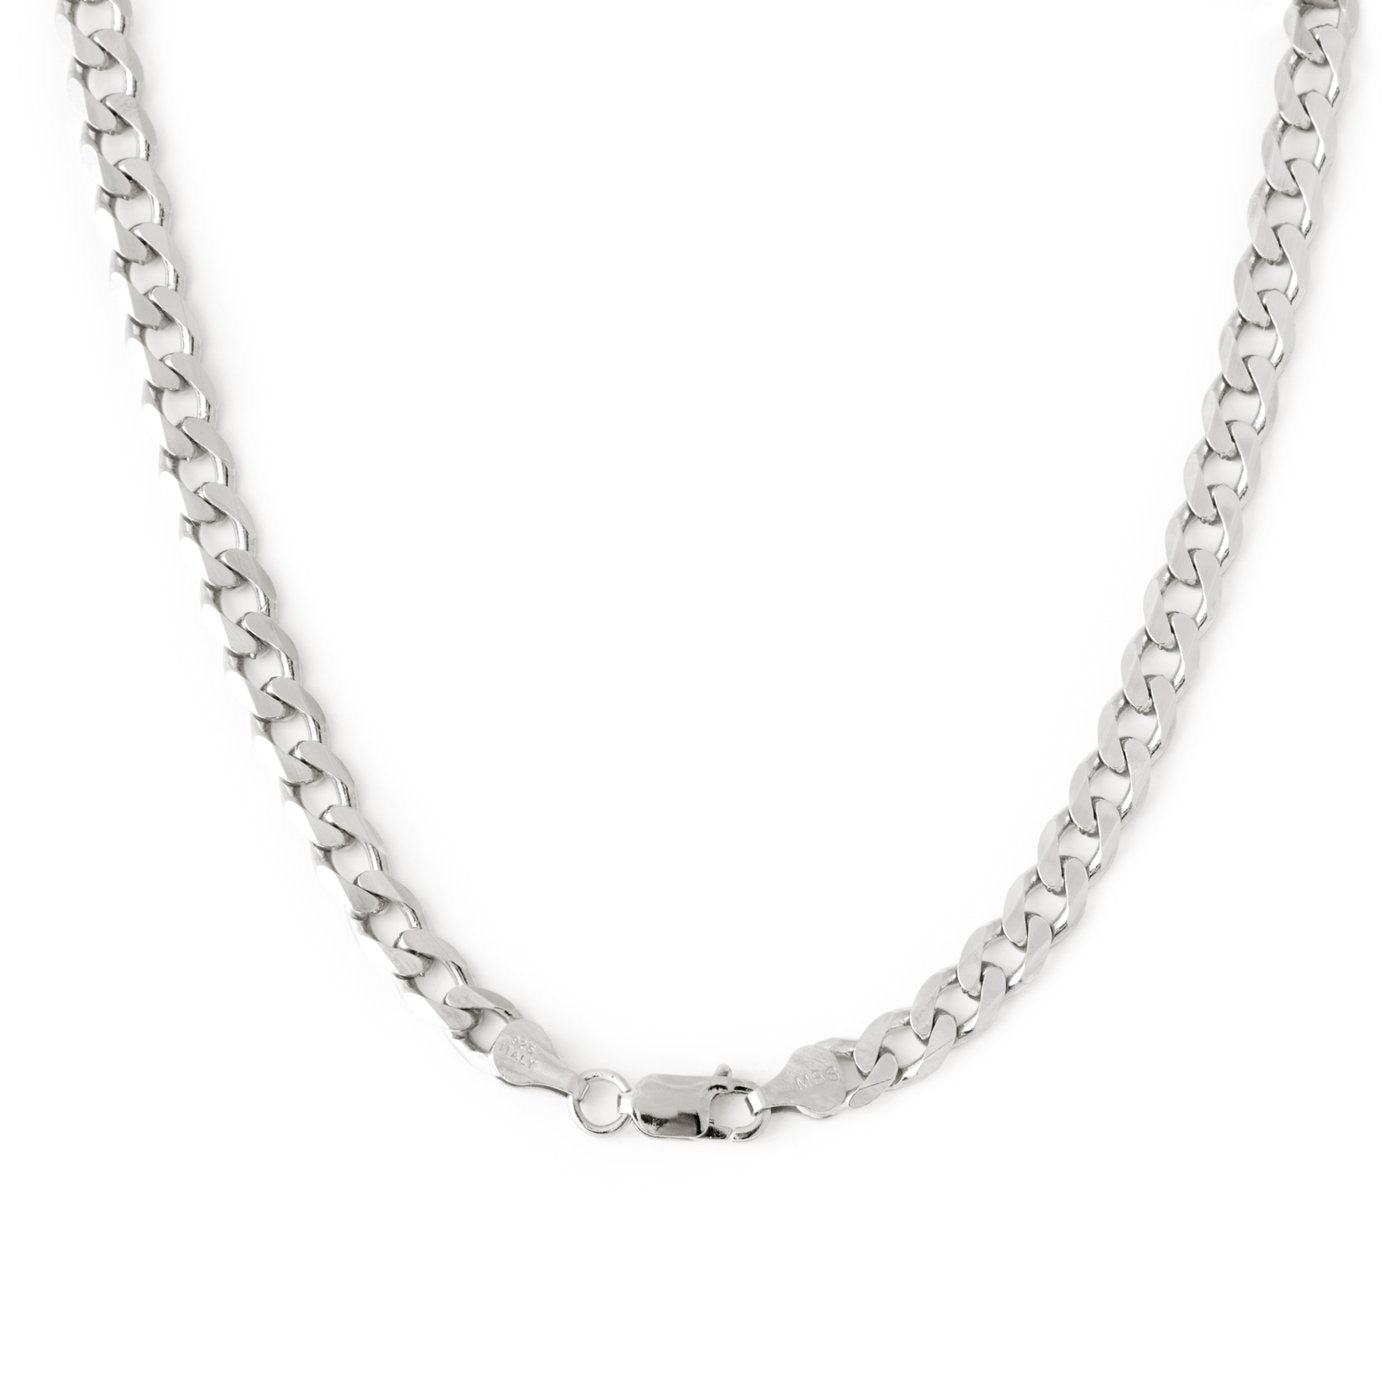 BOLD CURB NECKLACE IN SILVER